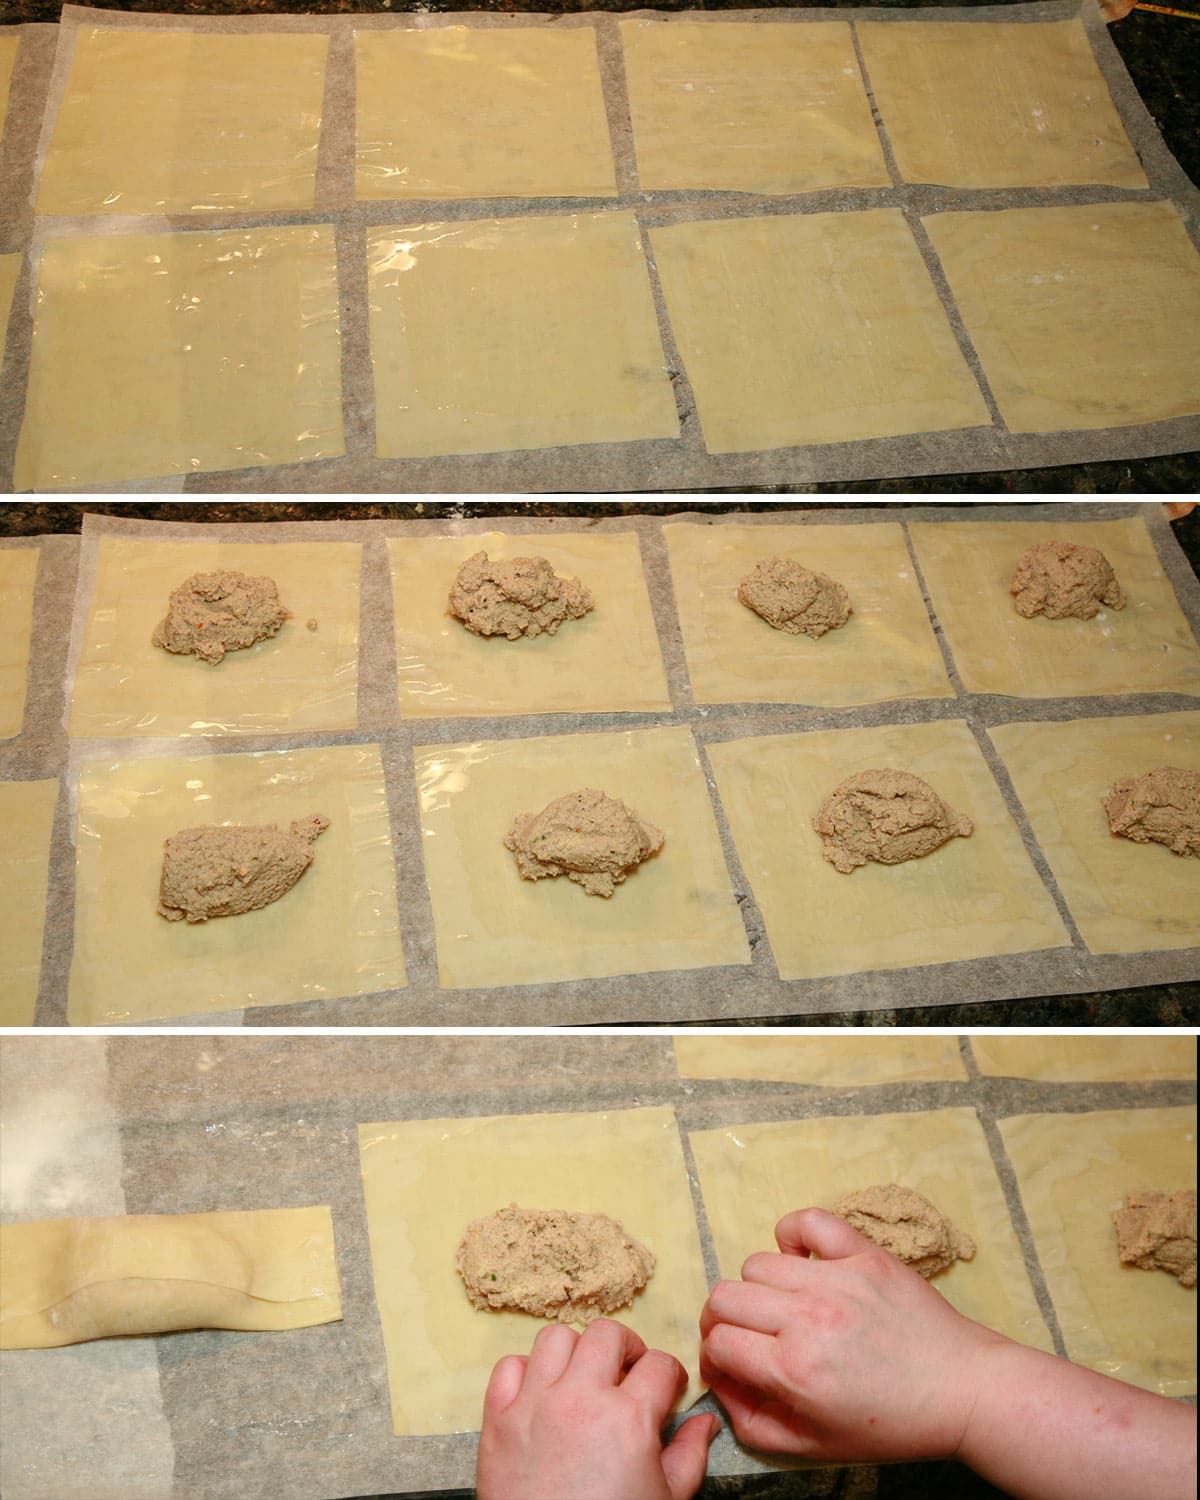 A compilation of 3 images, demonstrating brushing the wrappers, placing the filling, and starting to fold the wrappers.